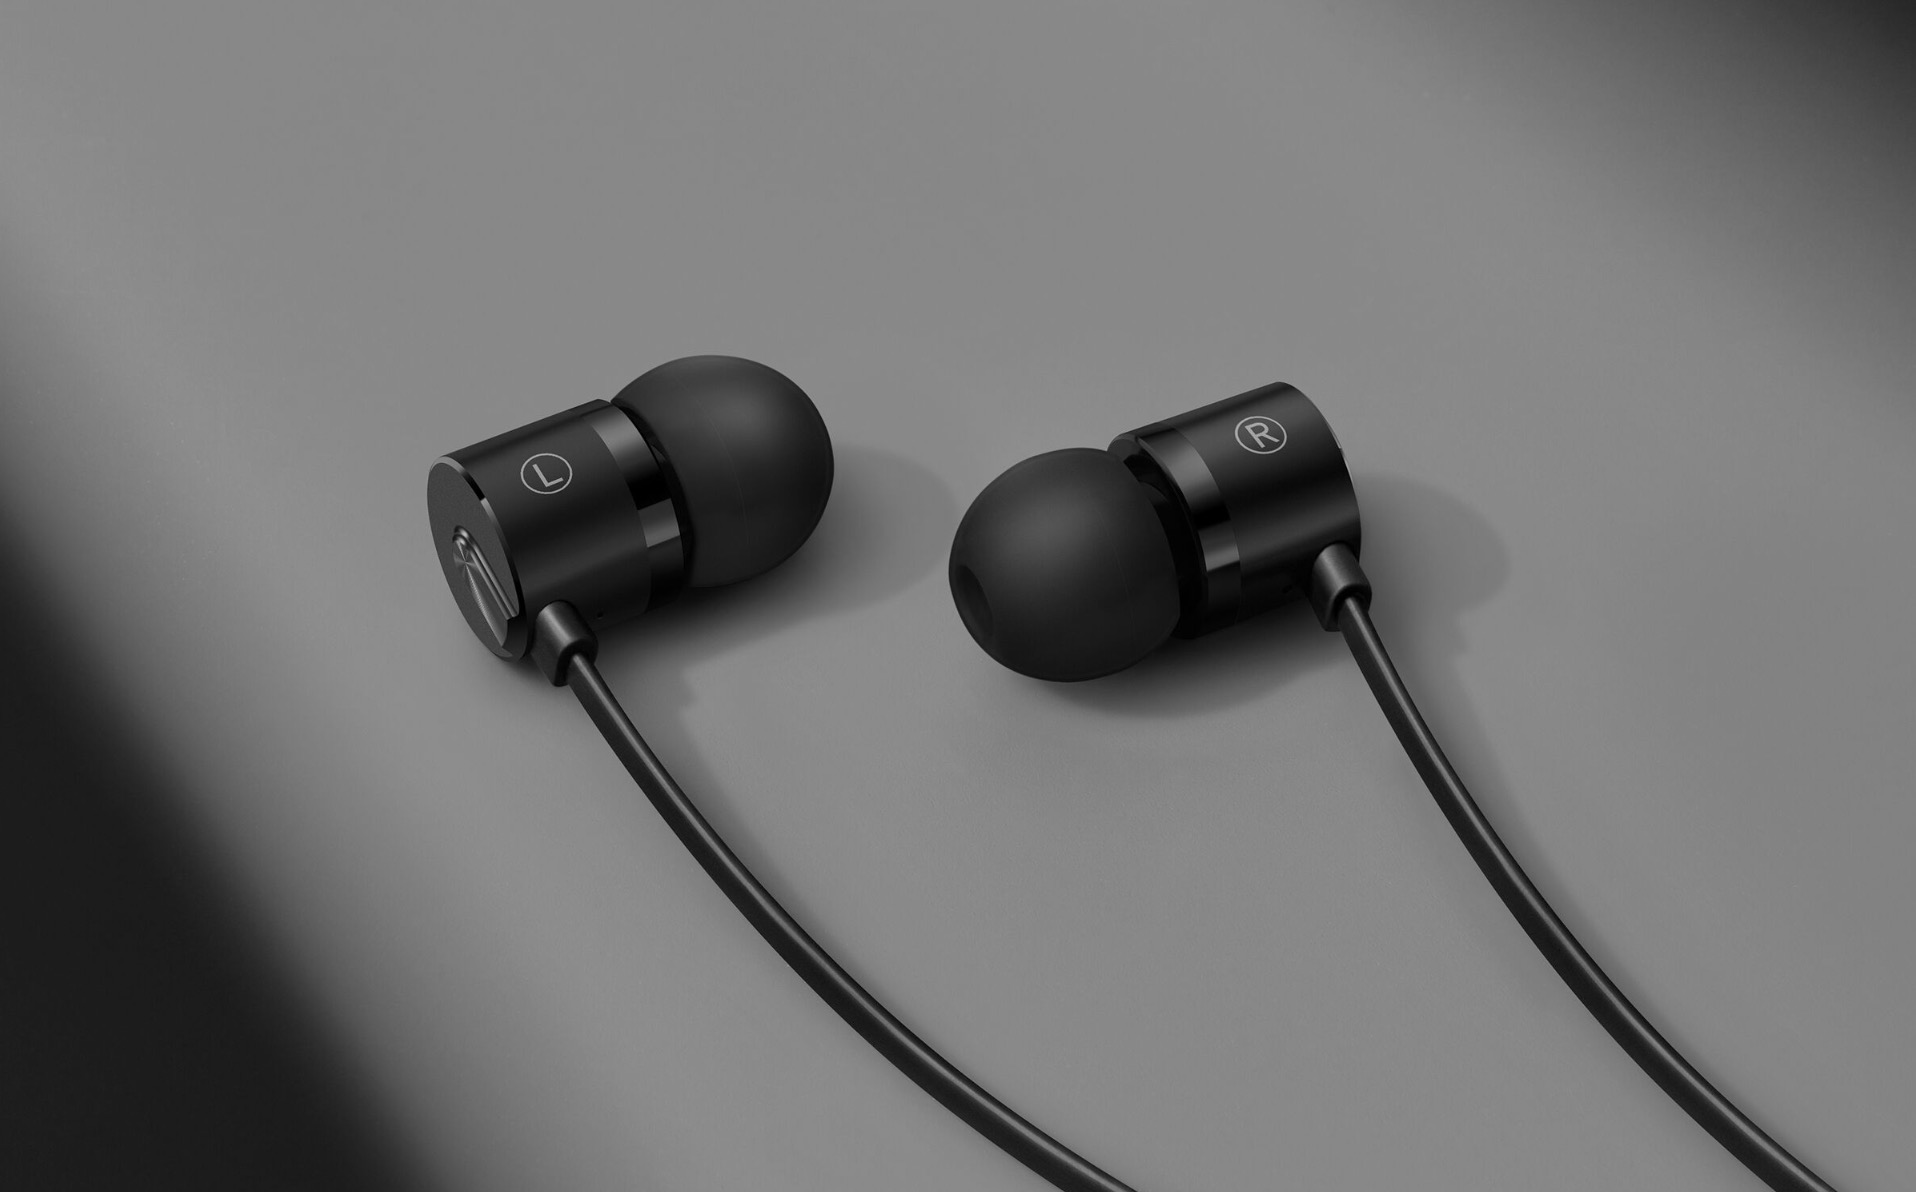 Announces USB-C Earbuds Because OnePlus 6T Won't Have a Jack